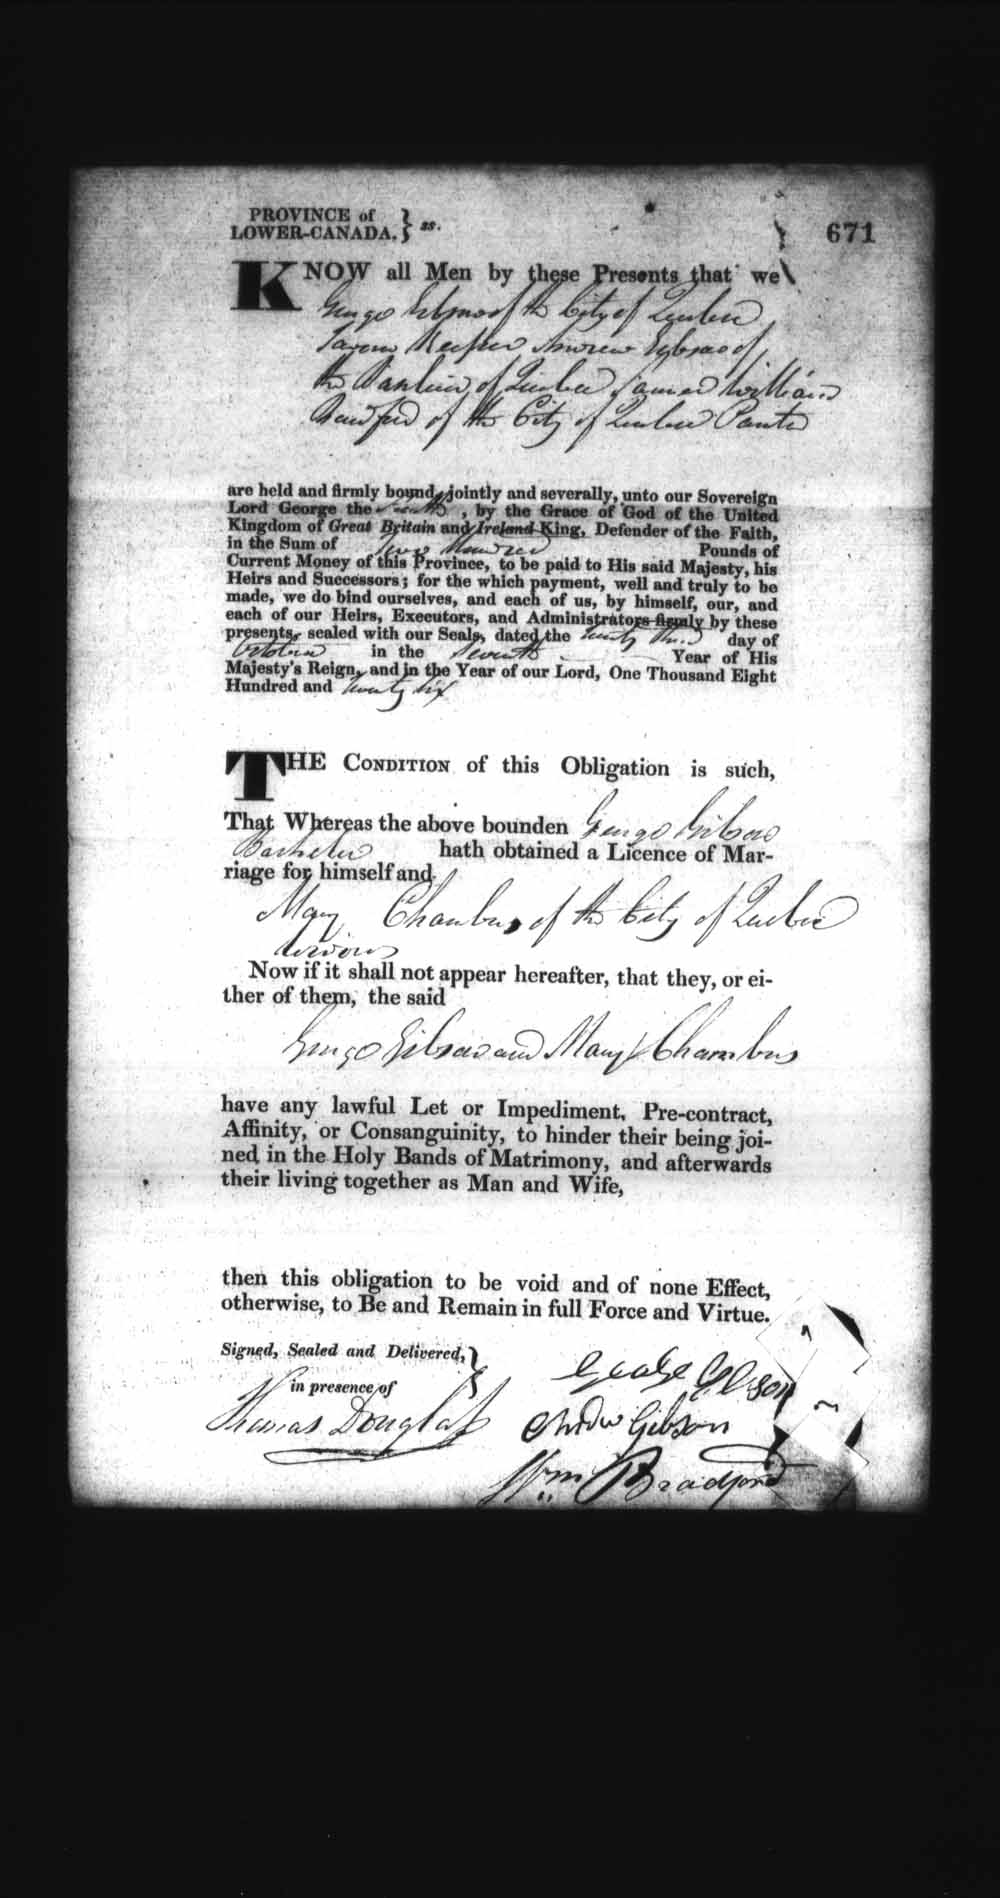 Digitized page of Upper and Lower Canada Marriage Bonds (1779-1865) for Image No.: e008236710